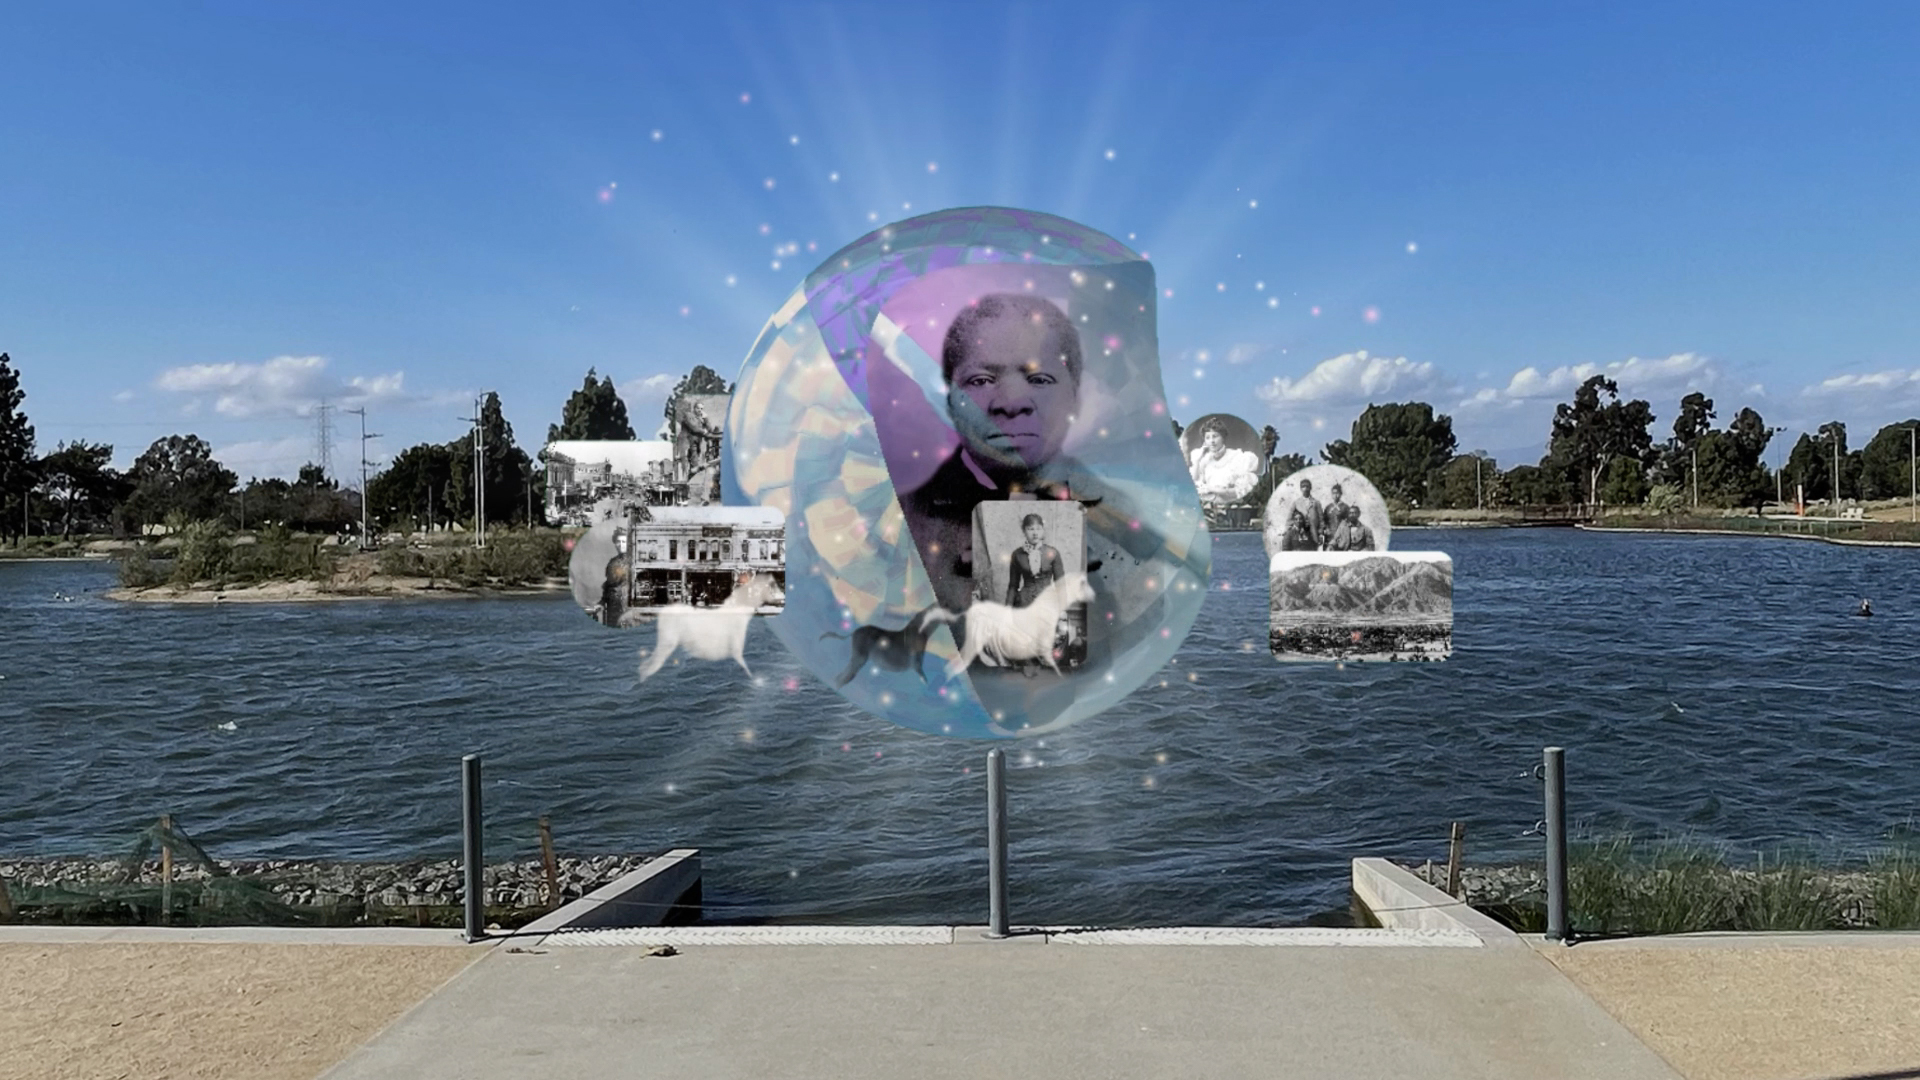 A sphere-like shape with black and white photographs overlaid on it floats in the air by a lake